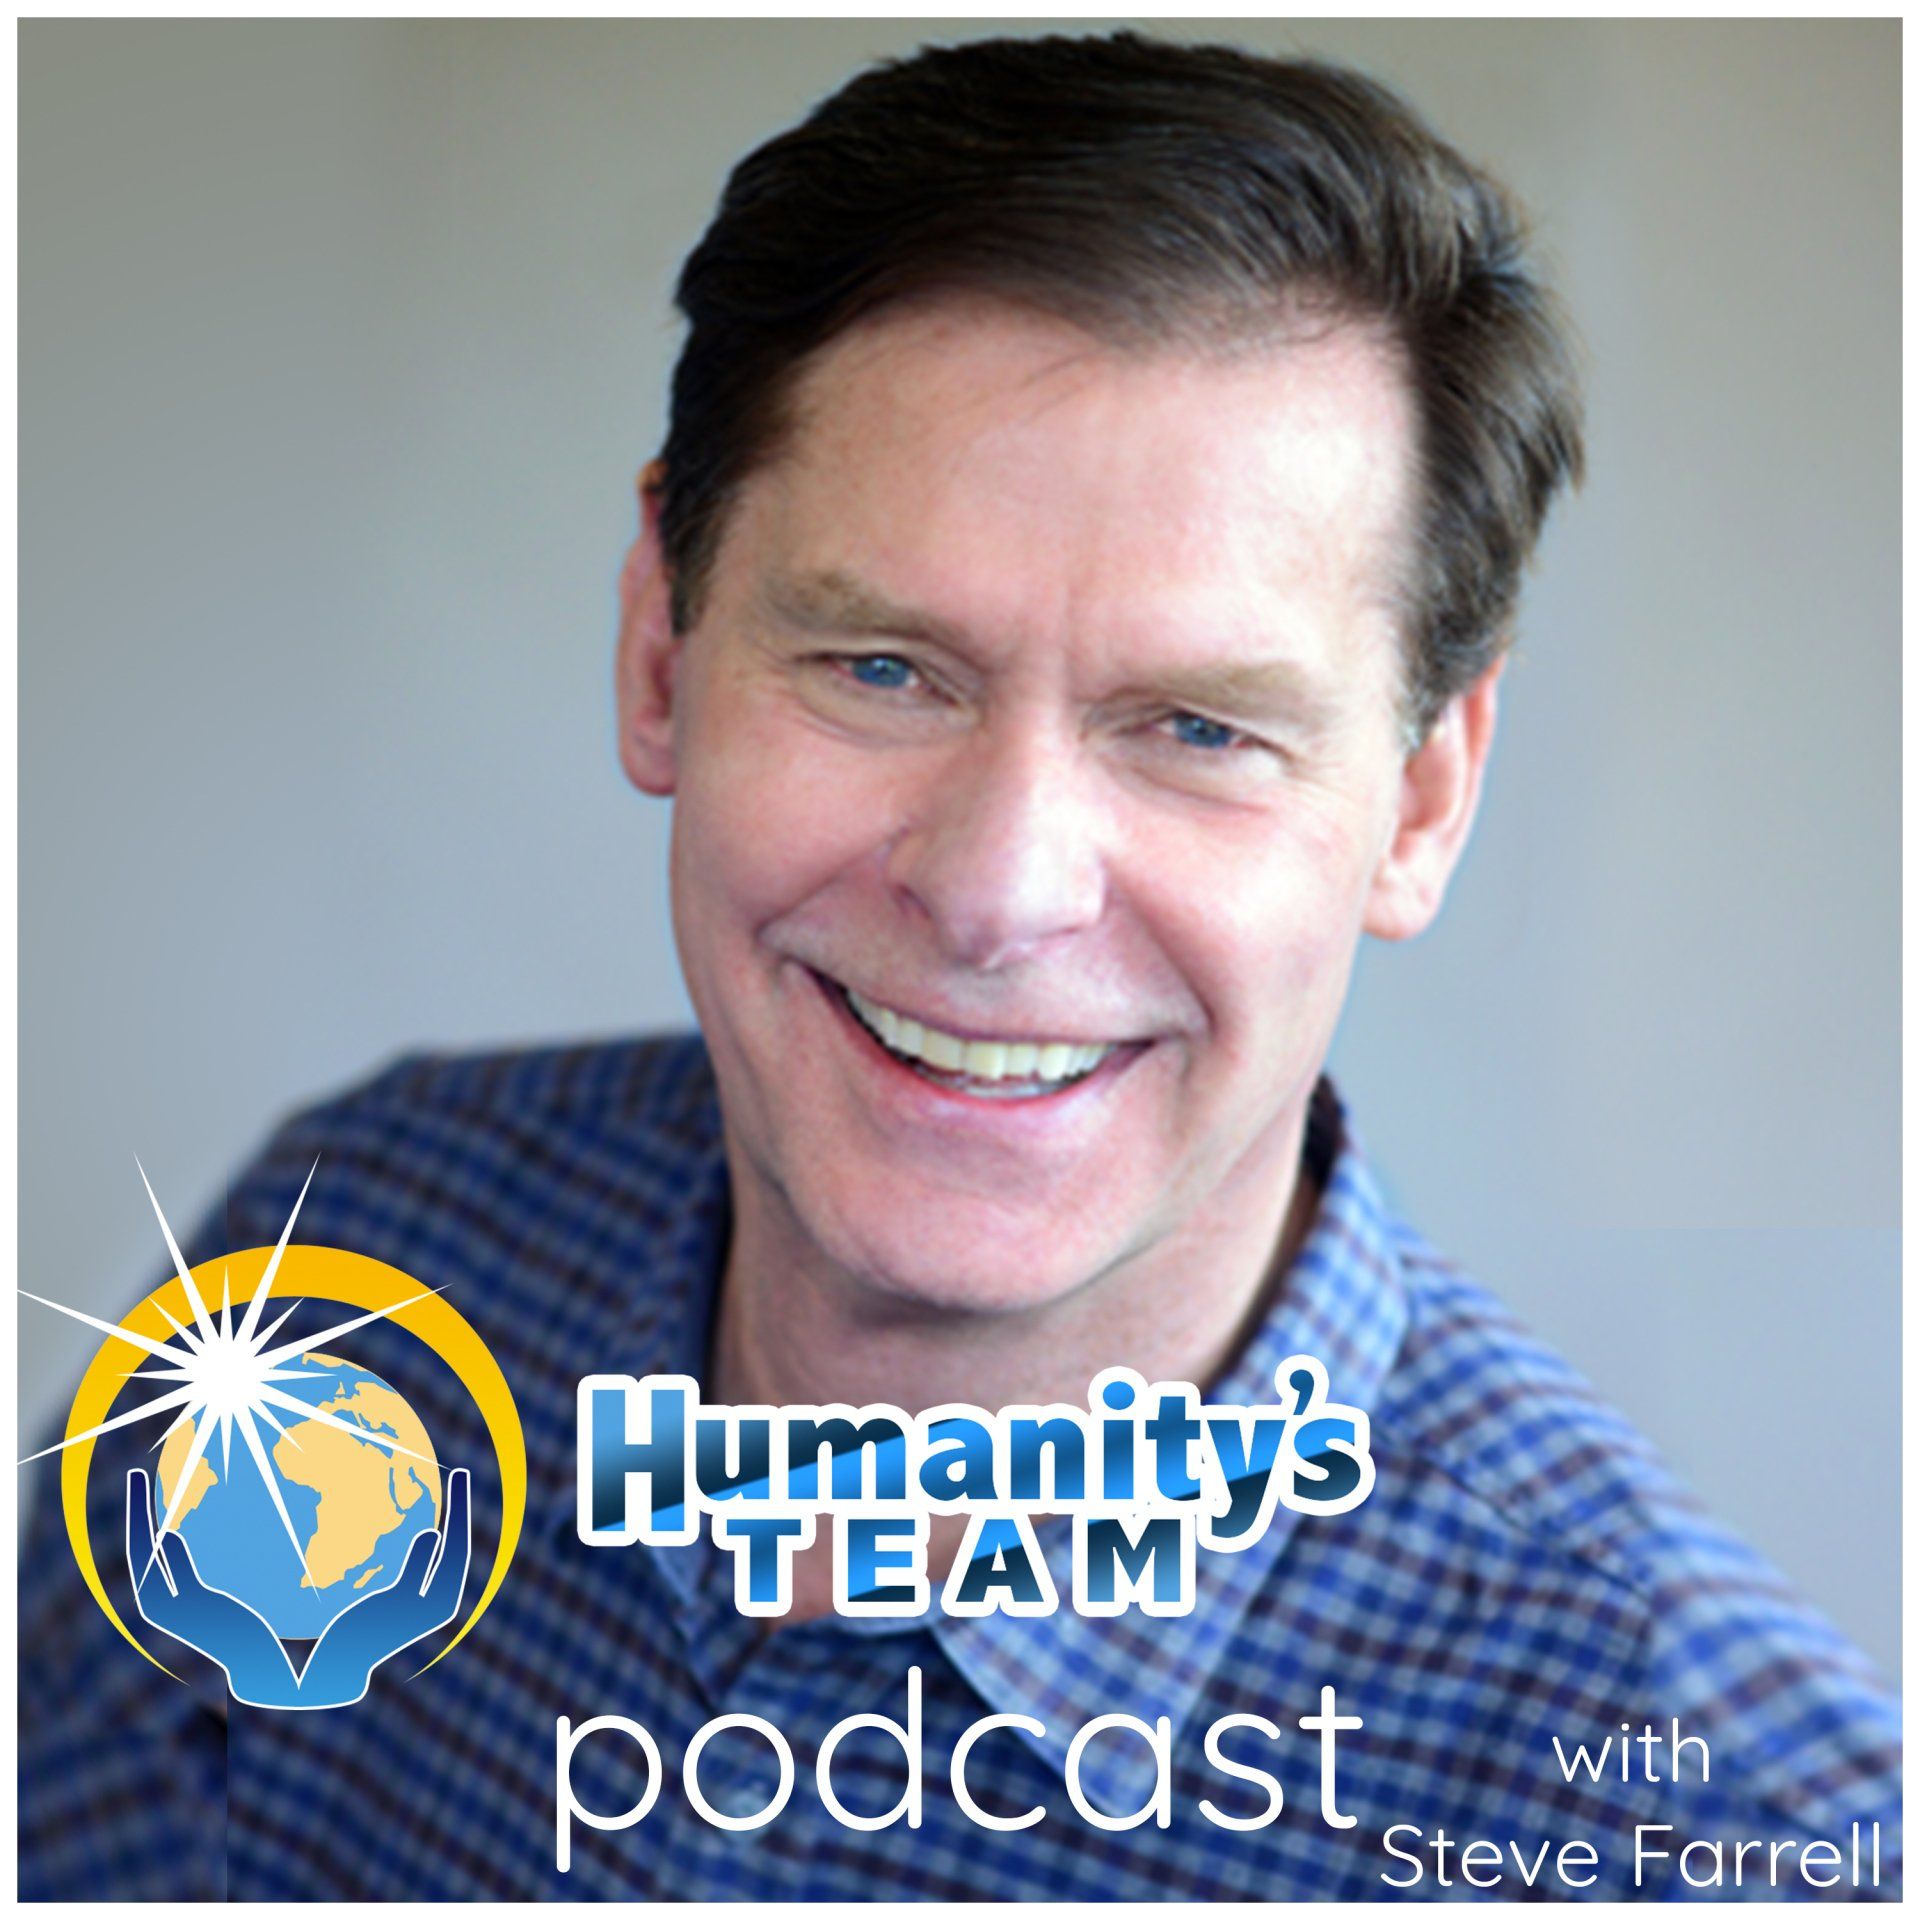 Humanity's Team podcast